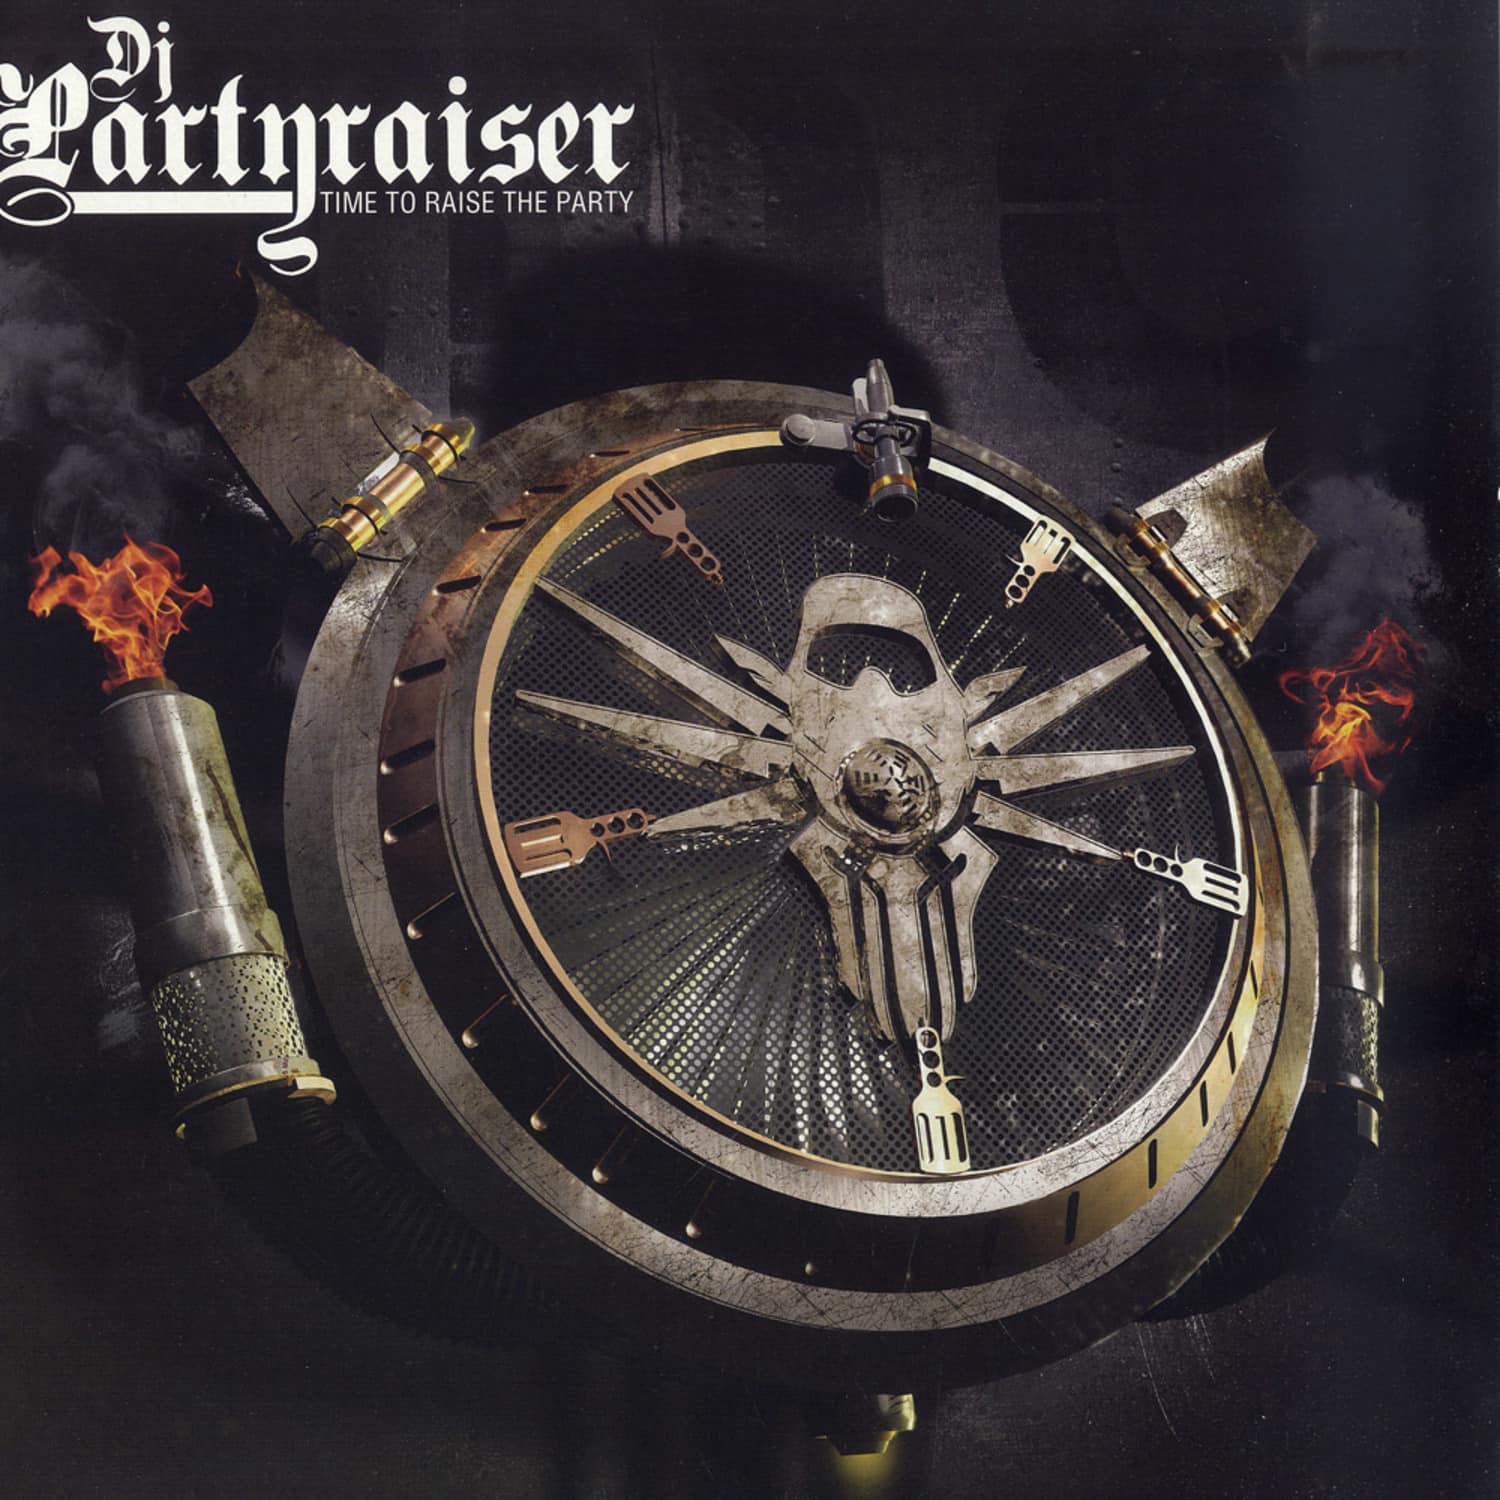 Partyraiser - TIME TO RAISE THE PARTY